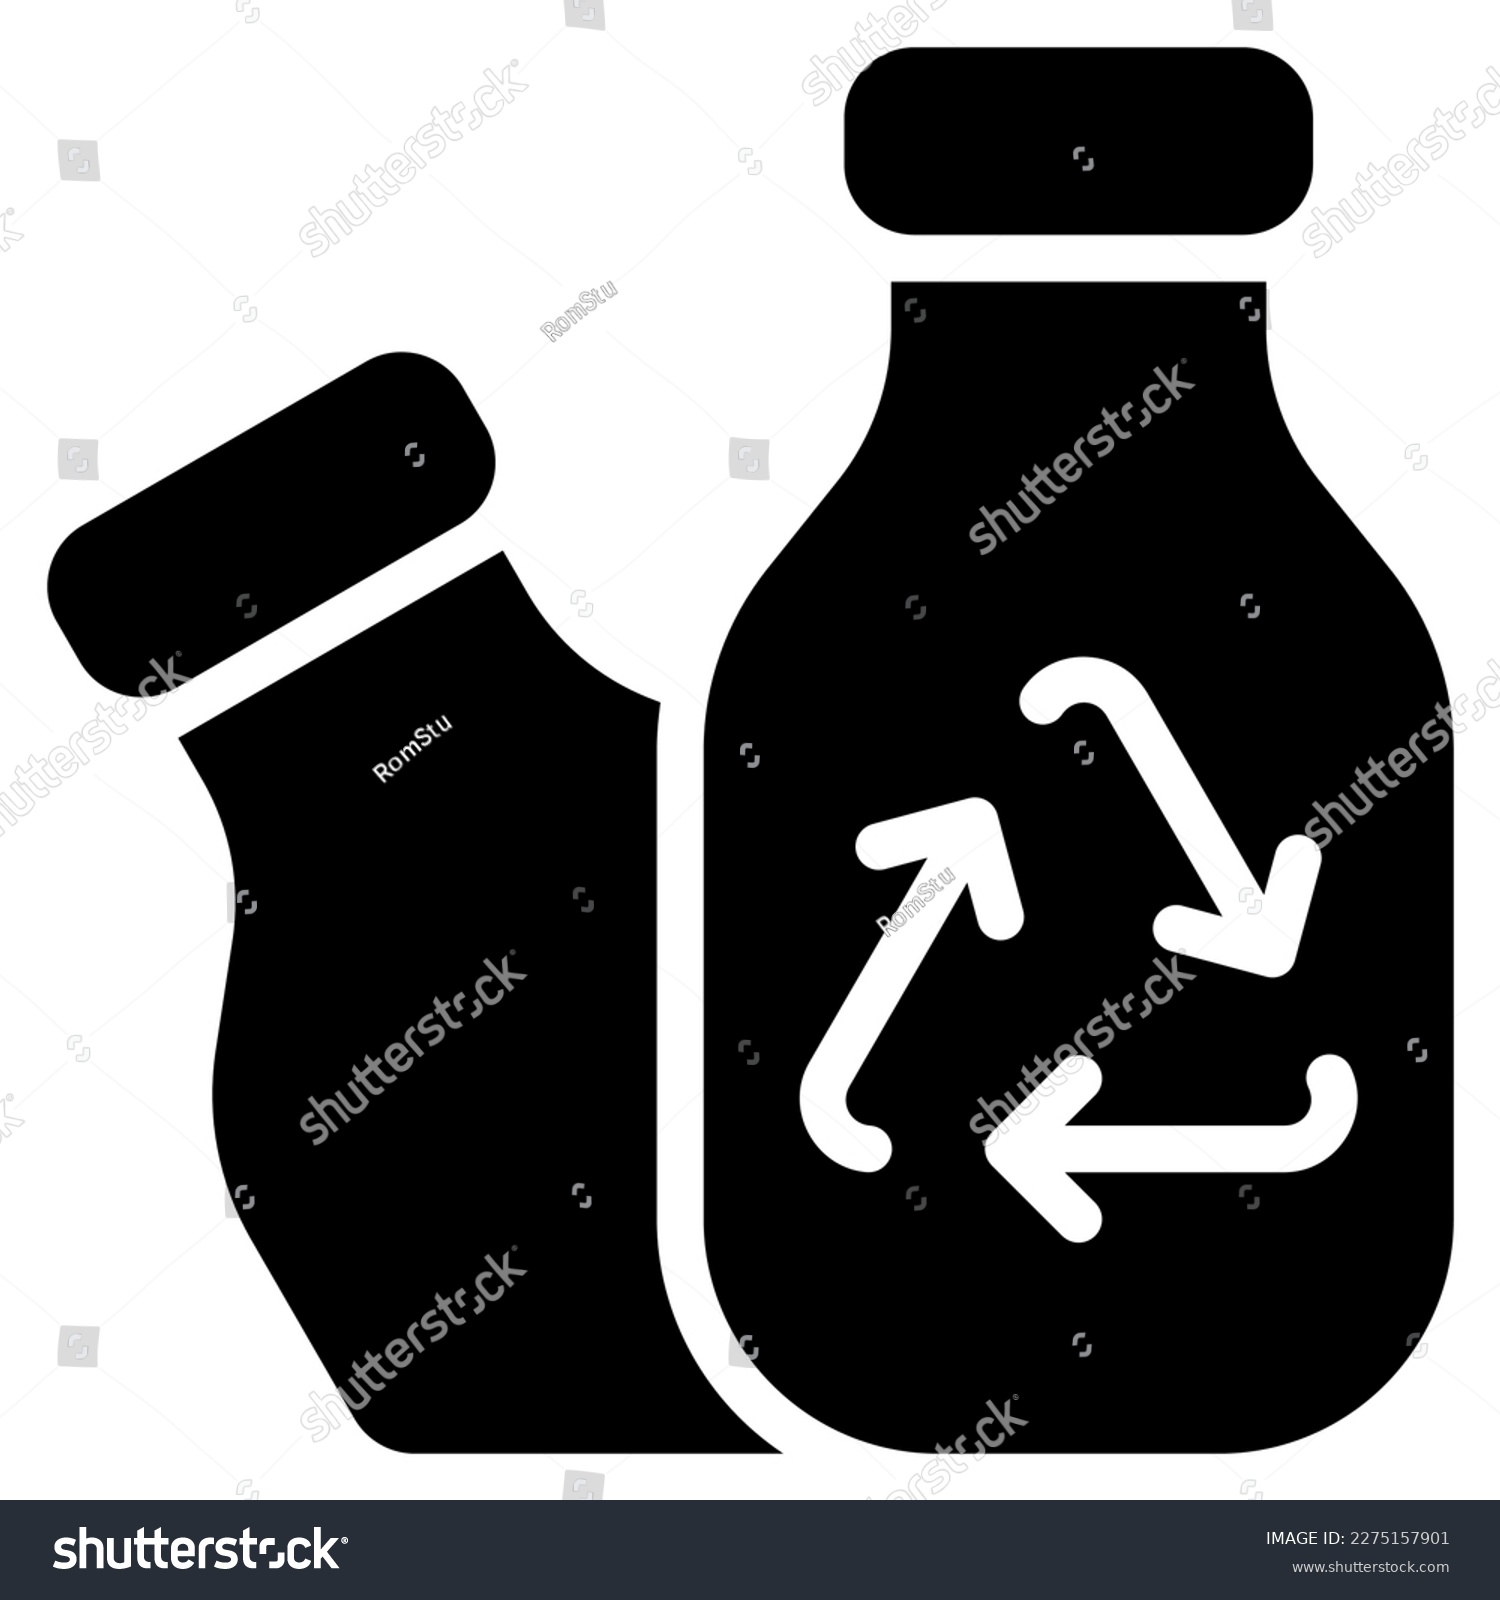 SVG of recycle bottle icon with glyph style and 64 px base. Suitable for website design, logo, app, ui and etc. svg